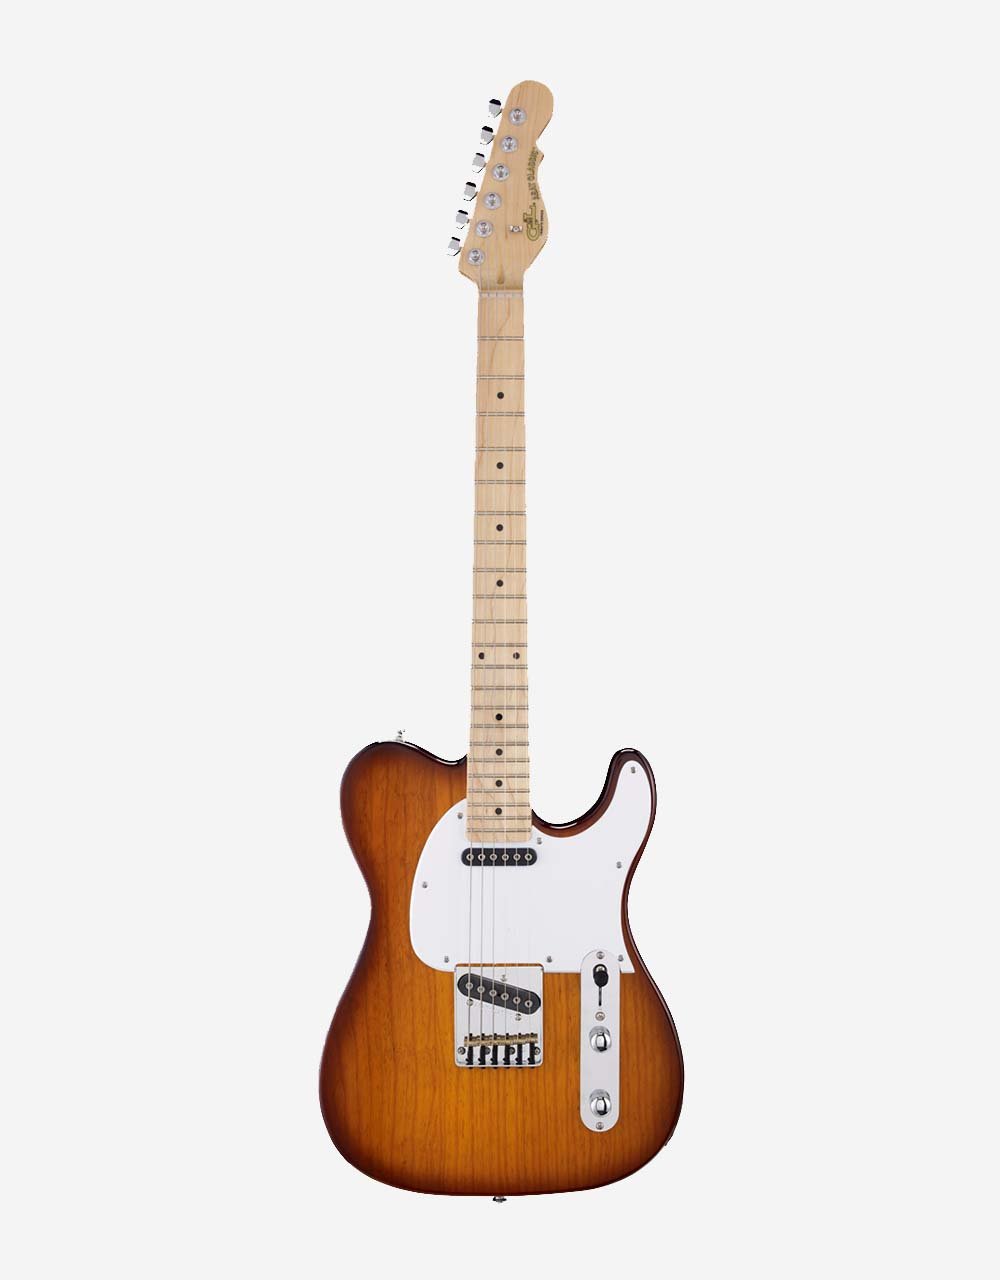 Tribute Series ASAT® CLASSIC | G&L Musical Instruments